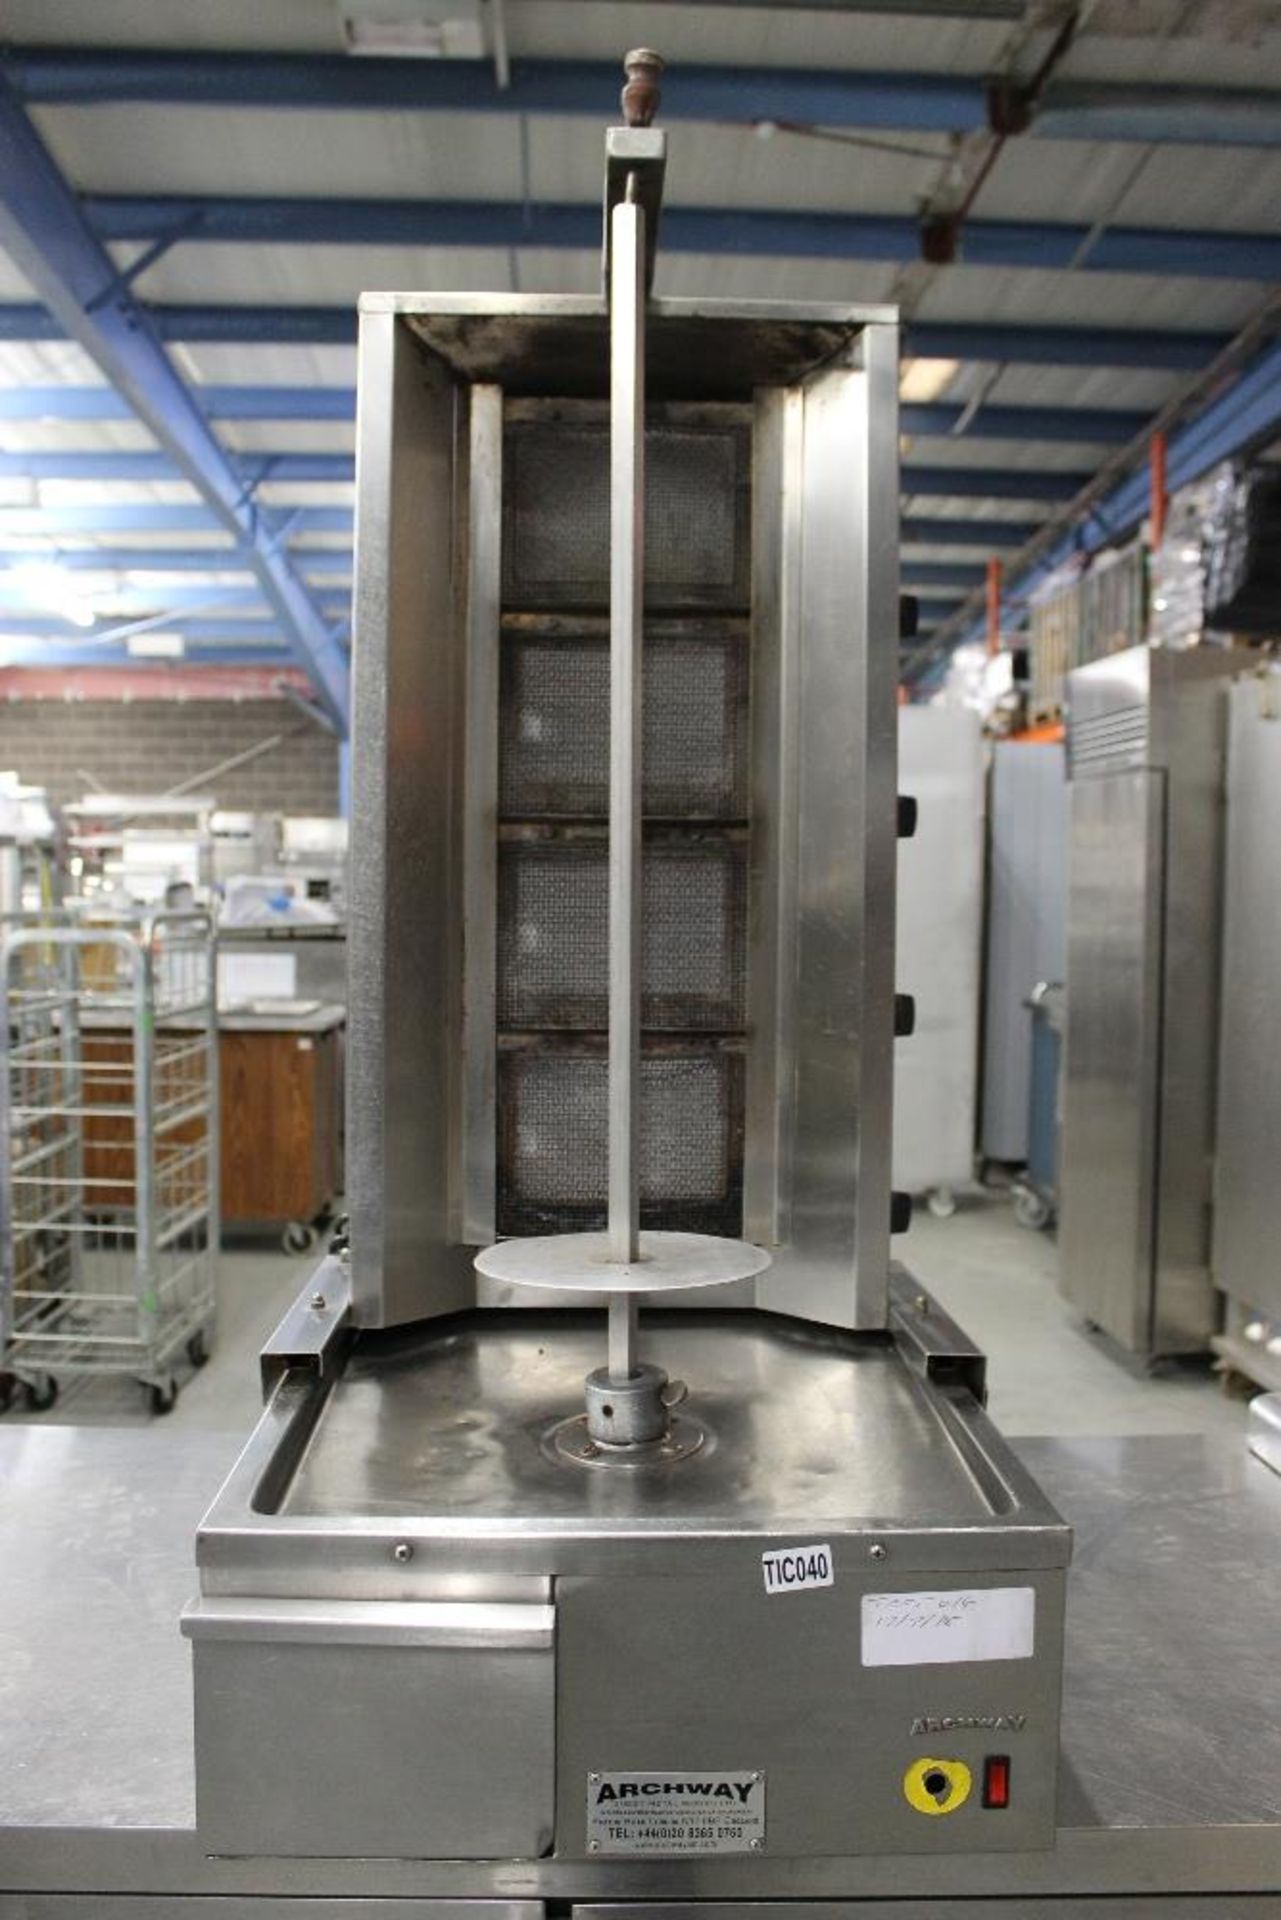 Archway Four Burner Kebab Machine – LPG Gas – also comes with Nat Gas Conversion Kit – Tested